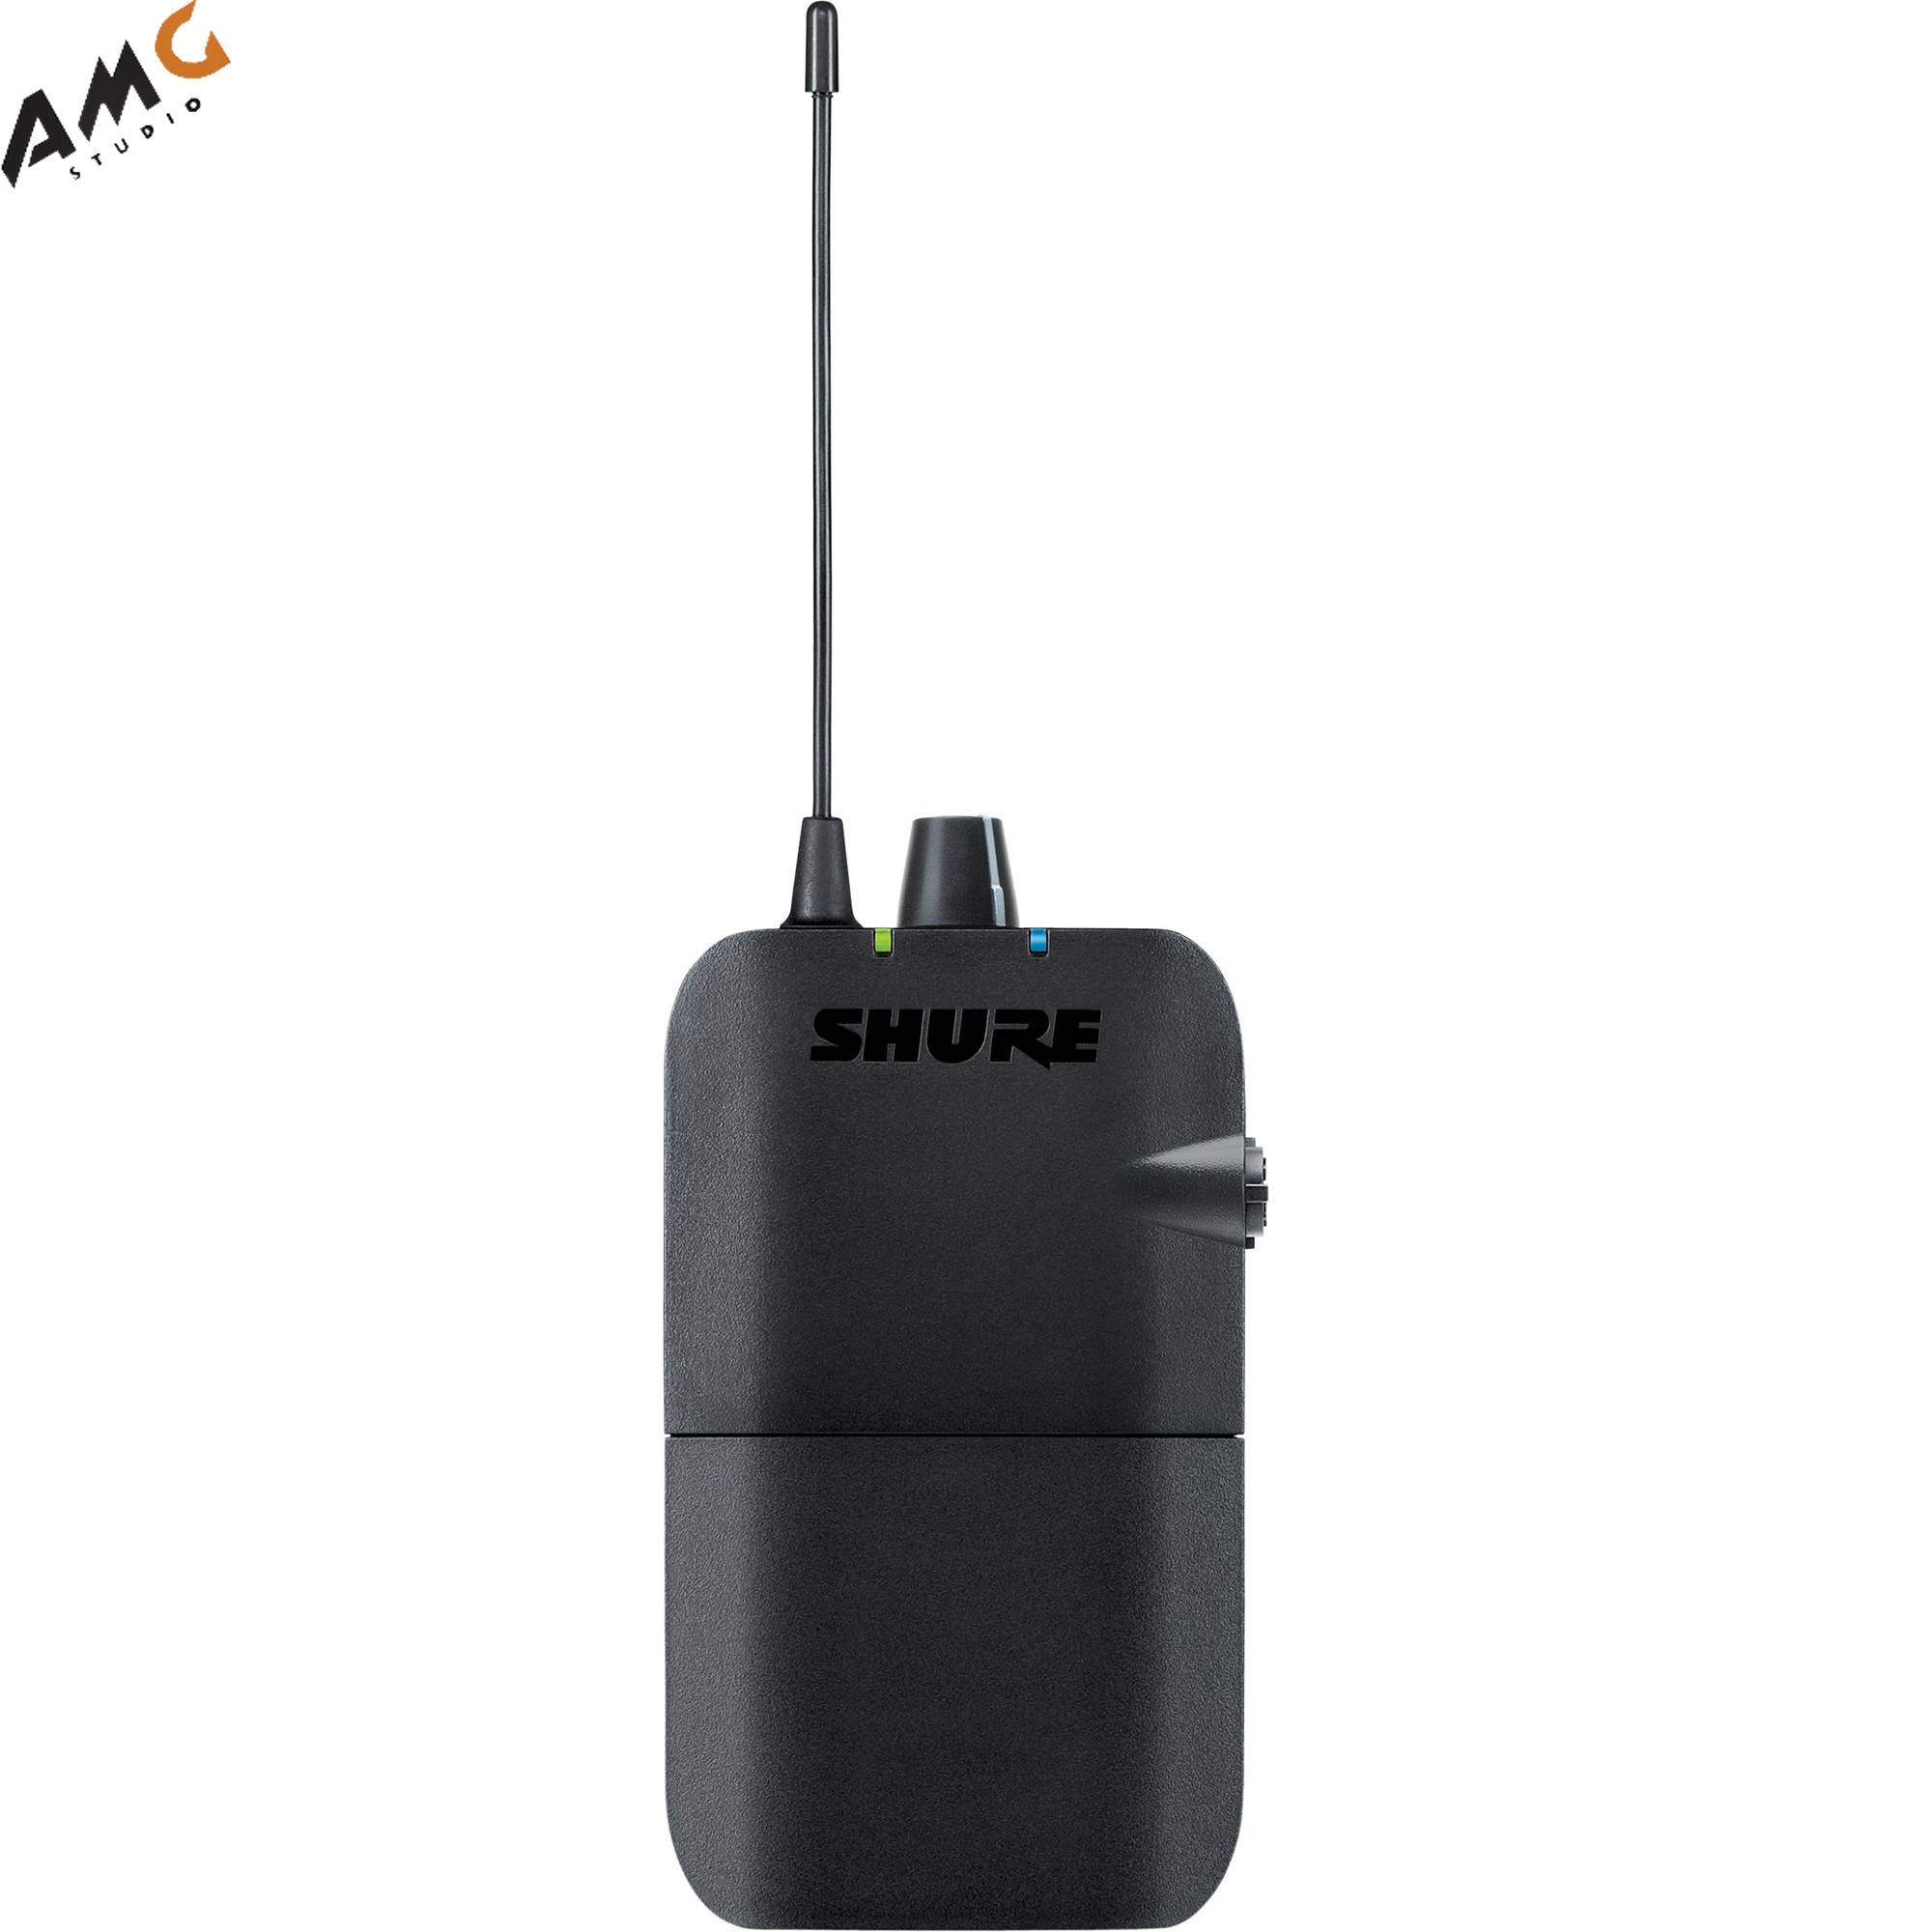 Shure P3R Wireless Bodypack Receiver for PSM300 Multiple Frequencies Available - Studio AMG